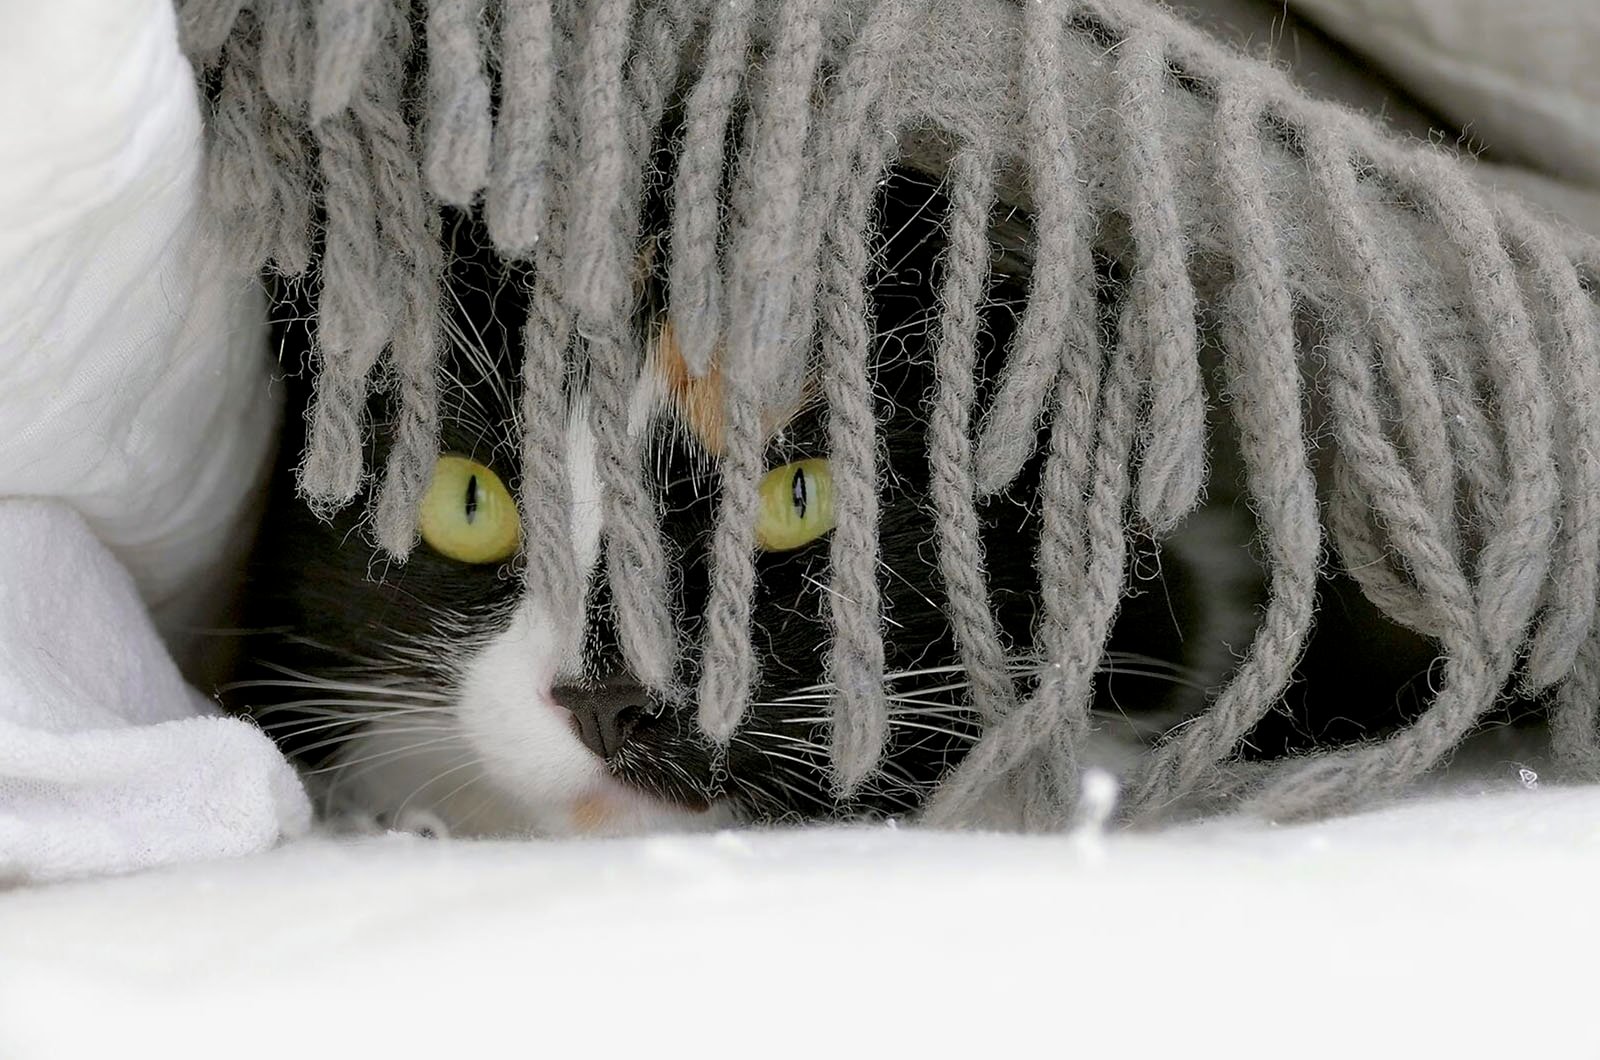 A cat with striking yellow eyes peering out from underneath a gray, woolly blanket, its face partially hidden, creating a playful and mysterious look.